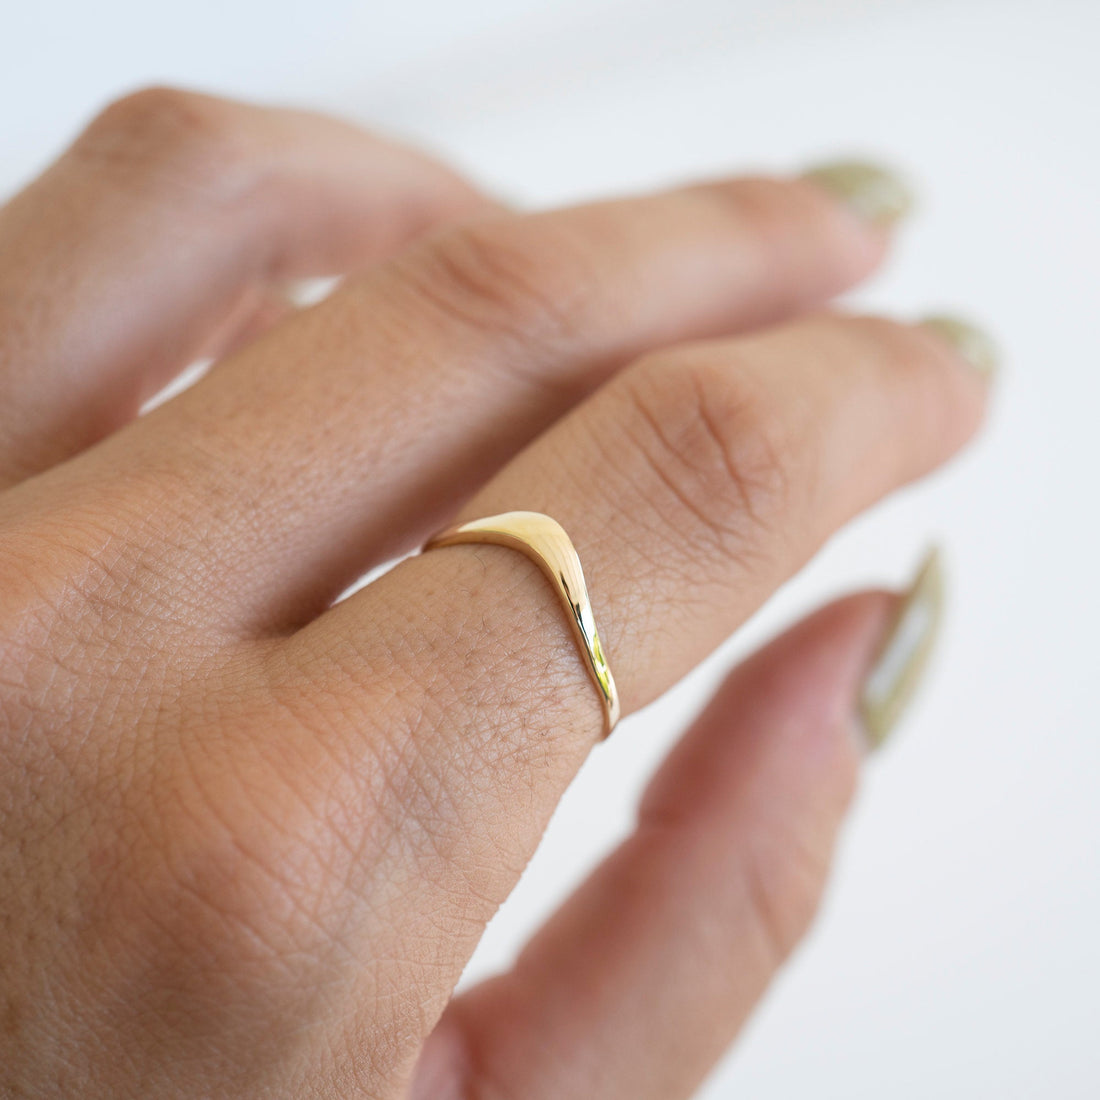 14k Solid Gold V Shaped Ring, 14k Gold Ring, Gold Stacker, Gold Band Ring, Delicate Ring, Simple Gold Ring, Womens Gold Ring, Gift for her